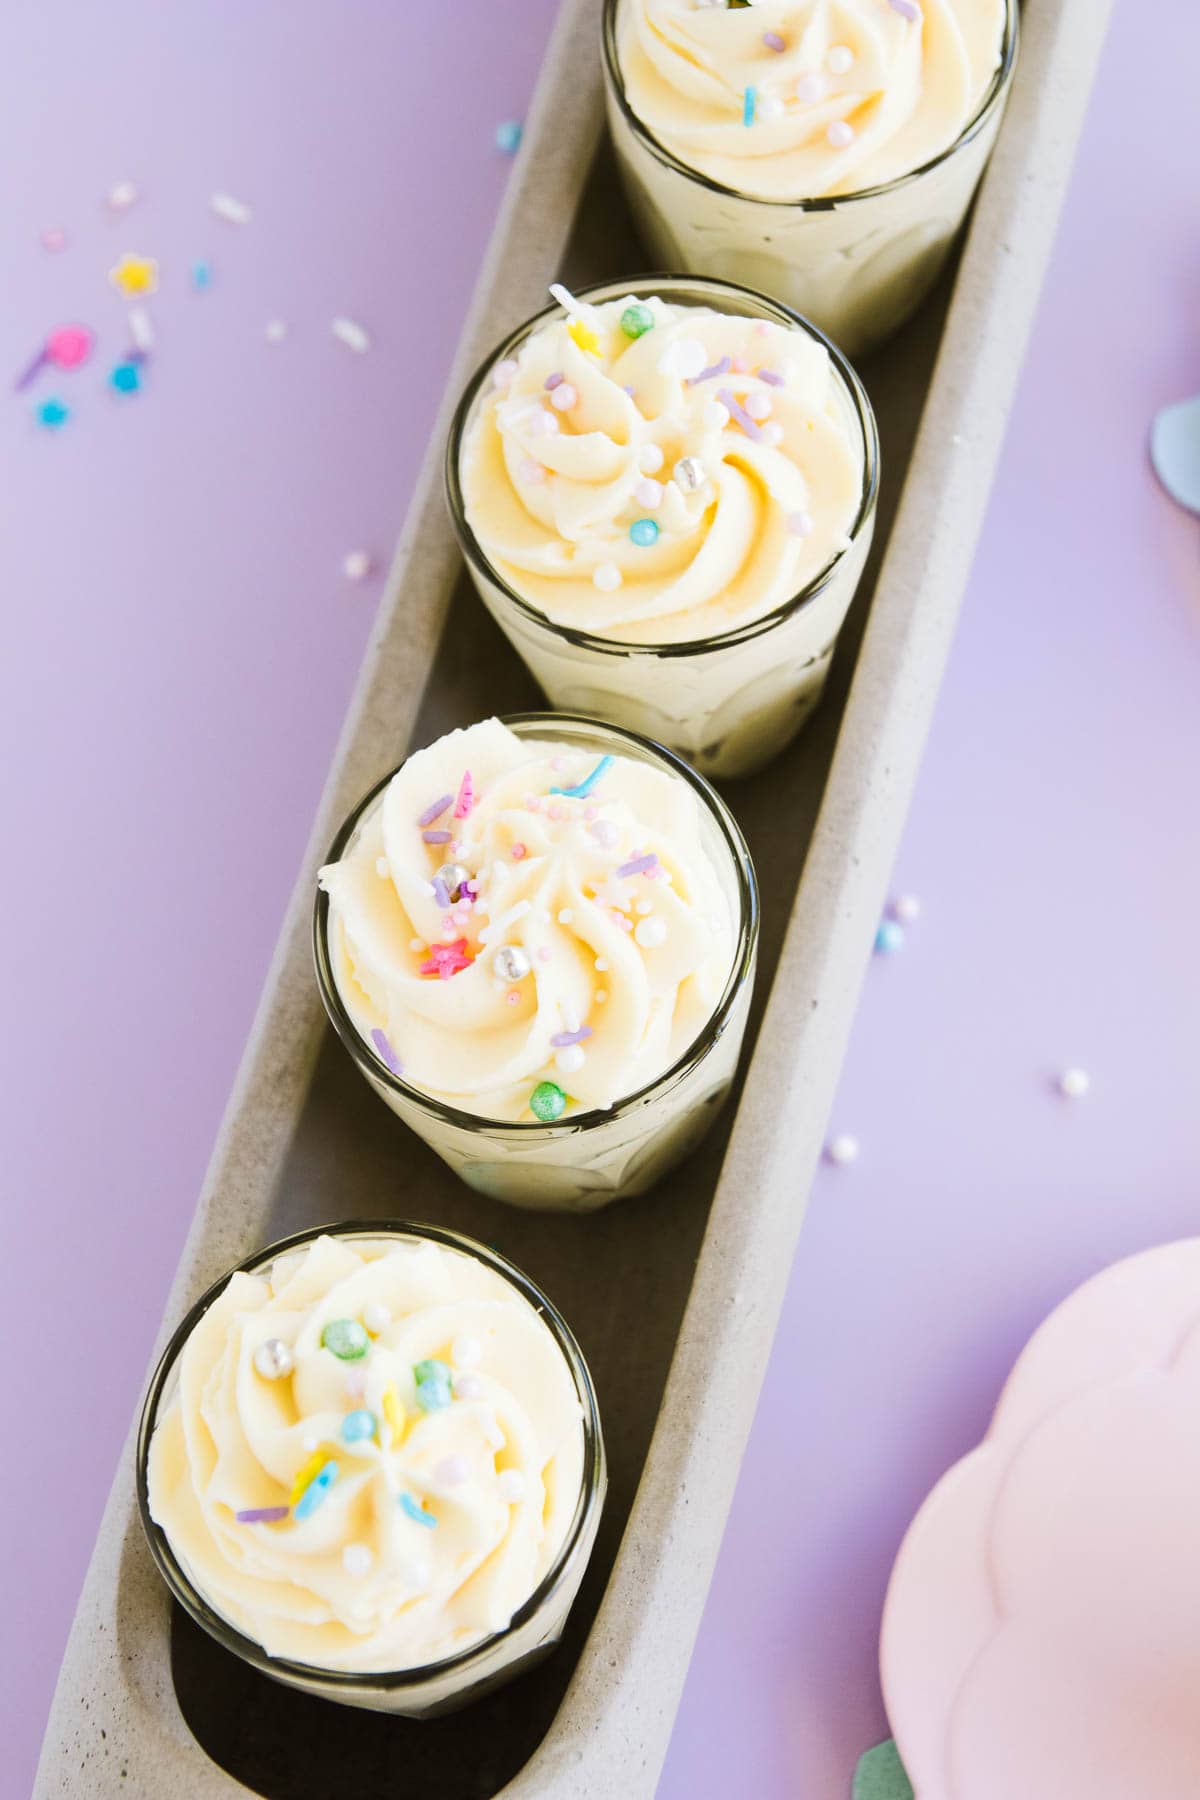 Four small glasses of white chocolate mousse, sprinkled with pastel sprinkles.